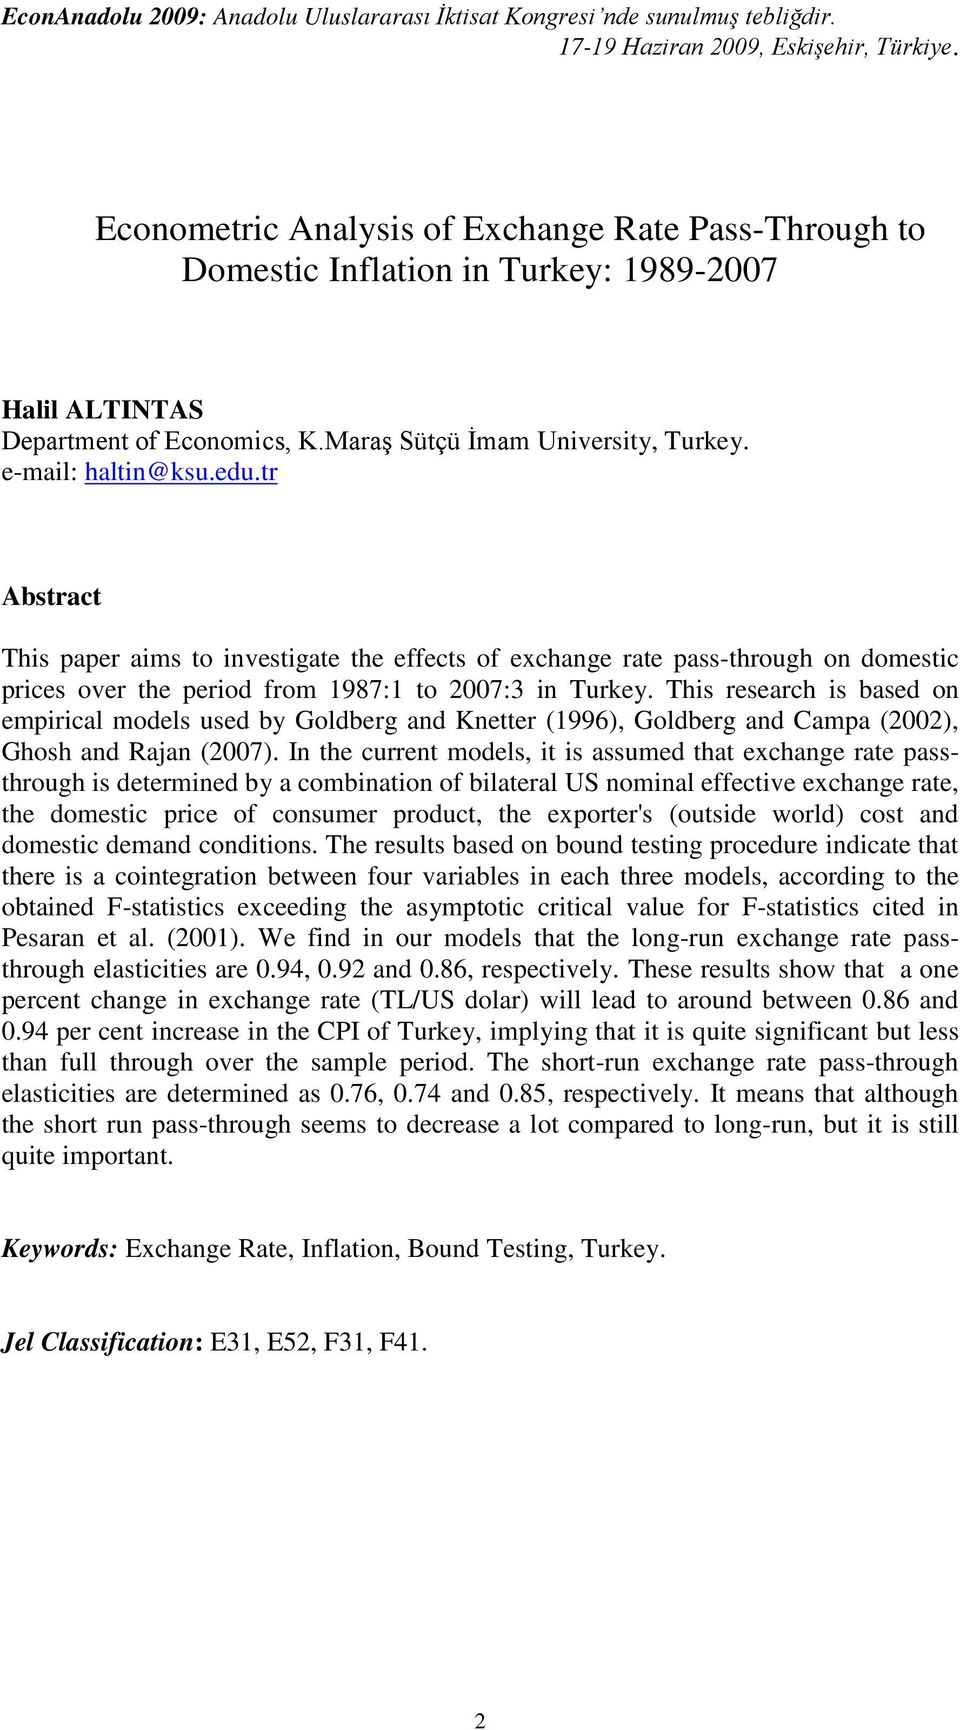 r Absrac This paper ais o invesigae he effecs of exchange rae pass-hrough on doesic prices over he period fro 1987:1 o 7:3 in Turkey.